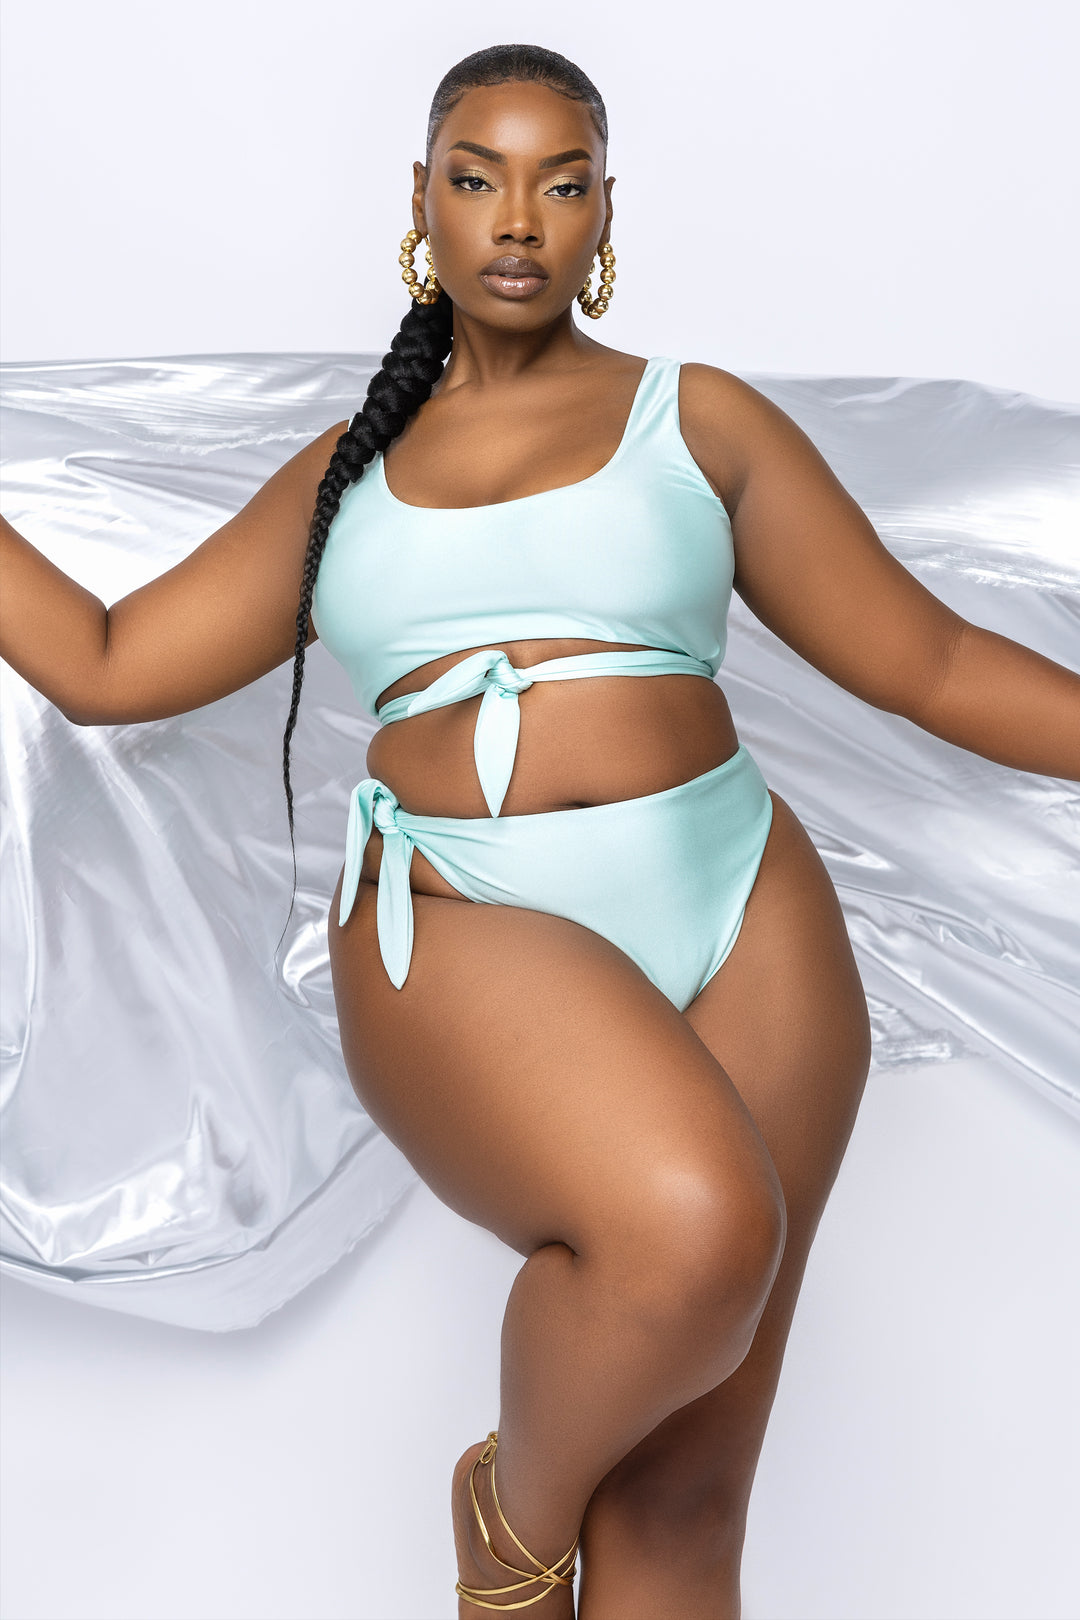 How My First Time Wearing a Two-Piece Plus Size Swimsuit Increased